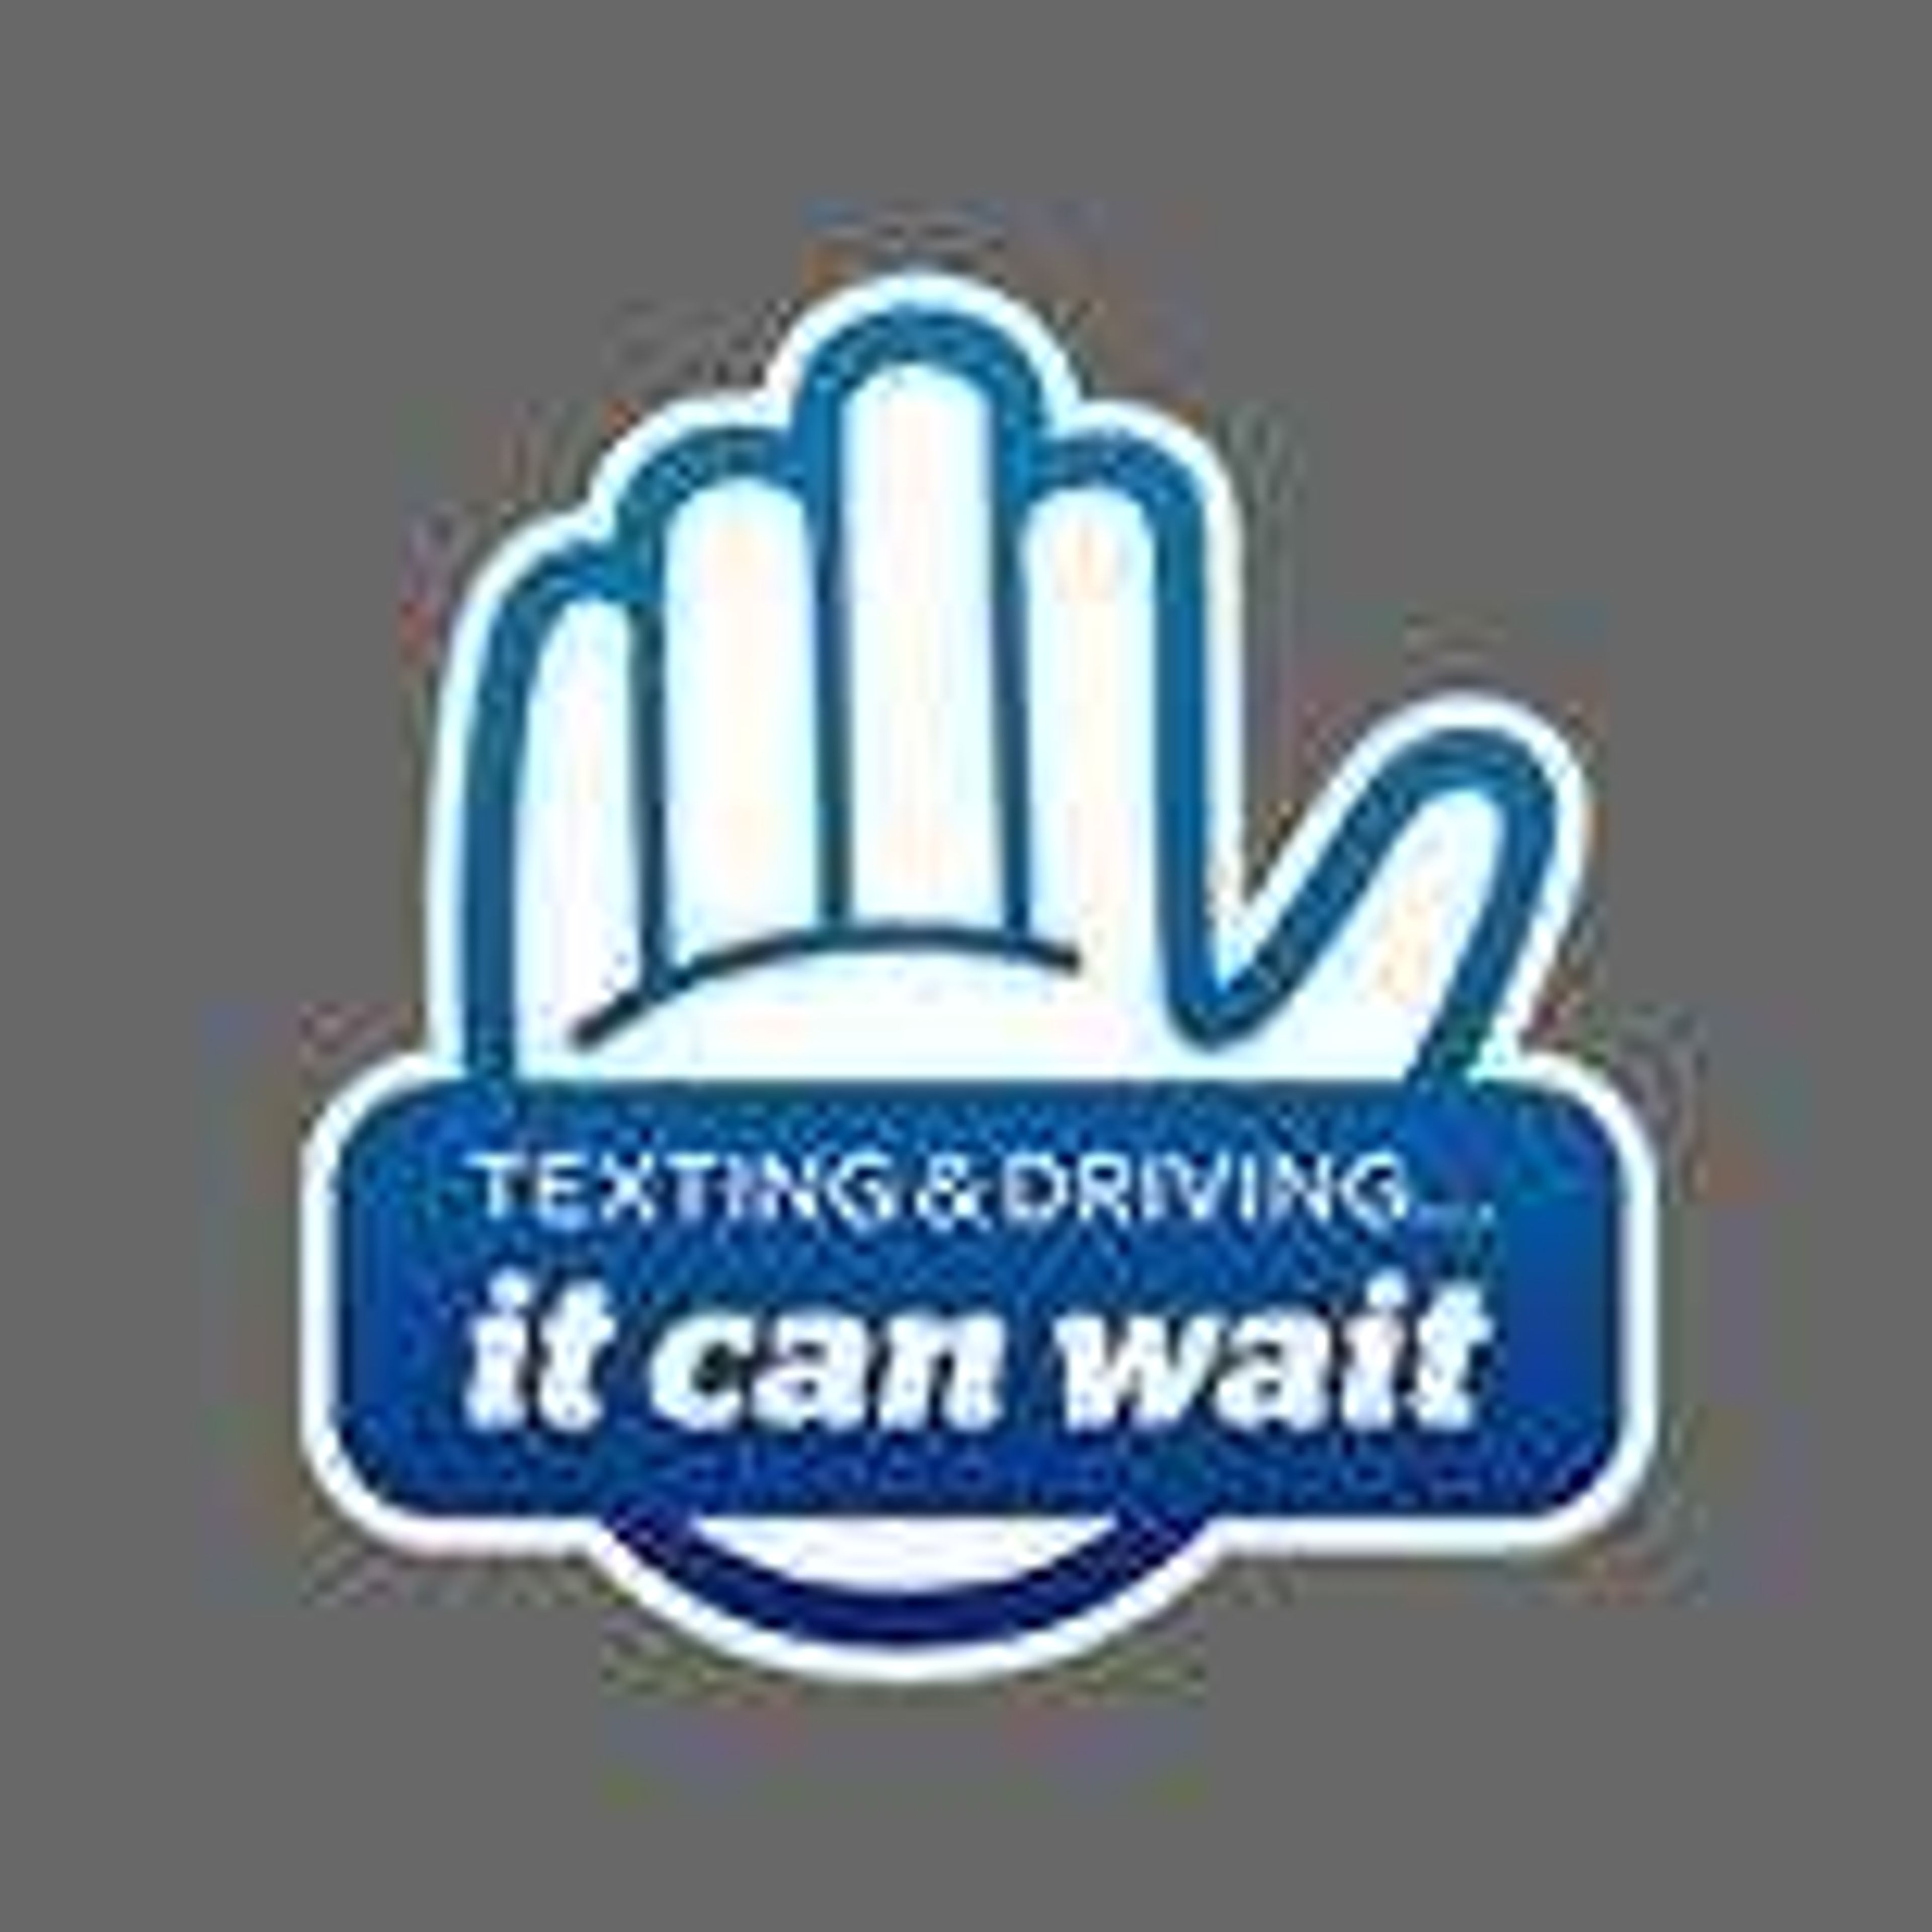 Logo of AT&T's "It can wait" campaign.